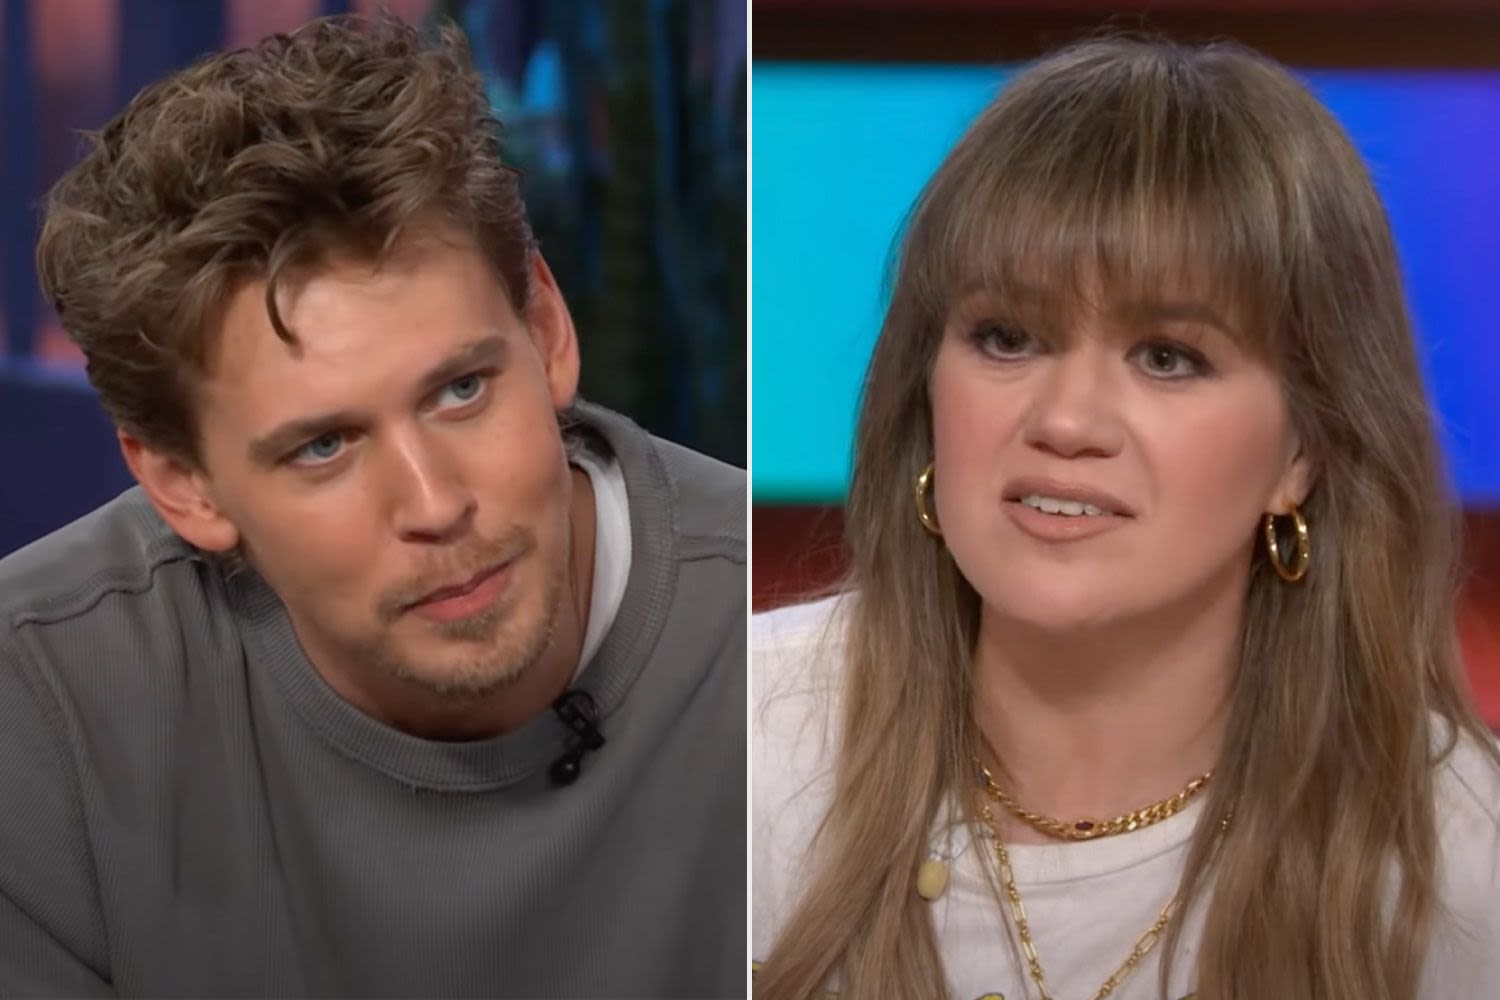 Watch Kelly Clarkson call out Austin Butler for being too perfect: 'Could you be any hotter?'